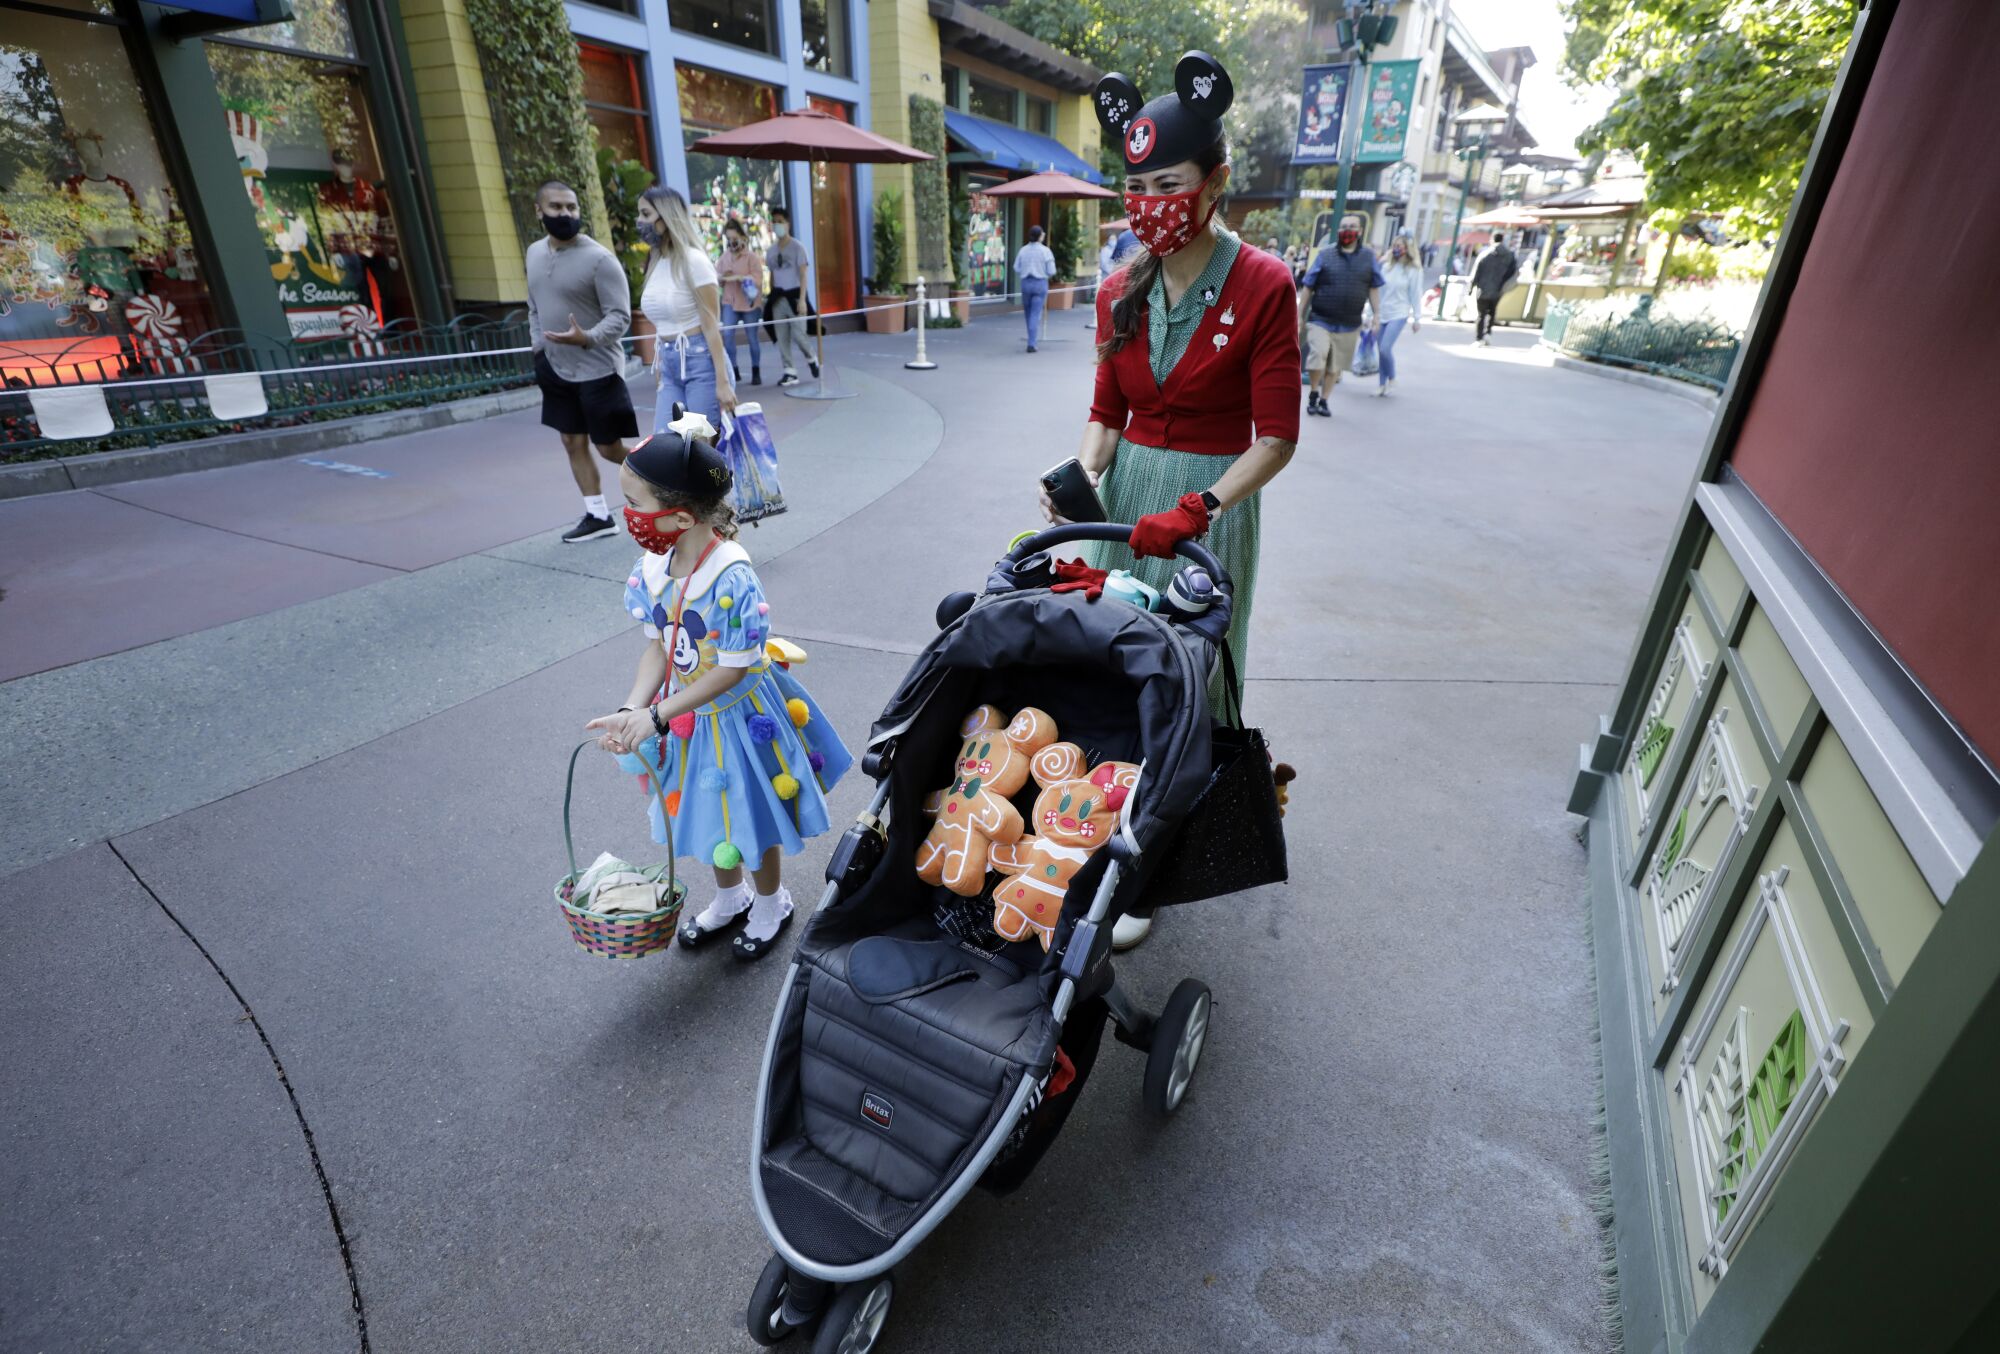 A woman in Minnie Mouse ears pushes a stroller while her daughter in a Disney dress walks next to her